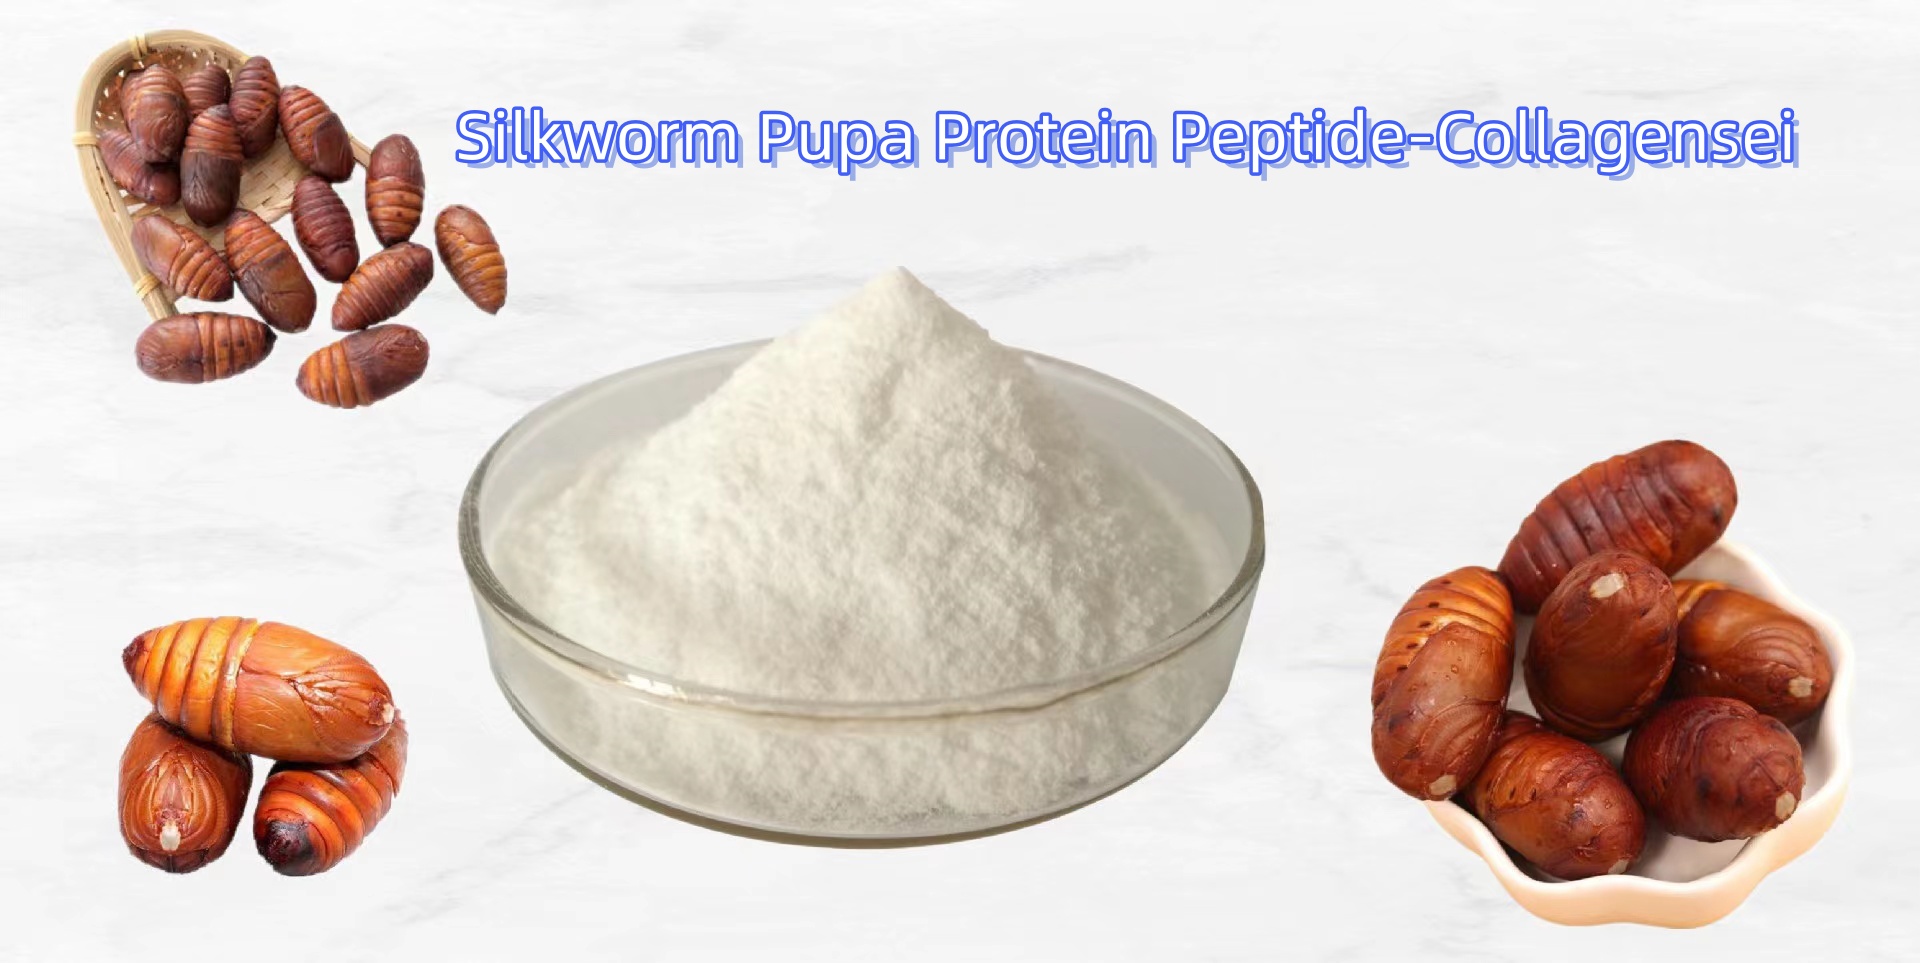 The bioactive power of silkworm pupa protein peptide